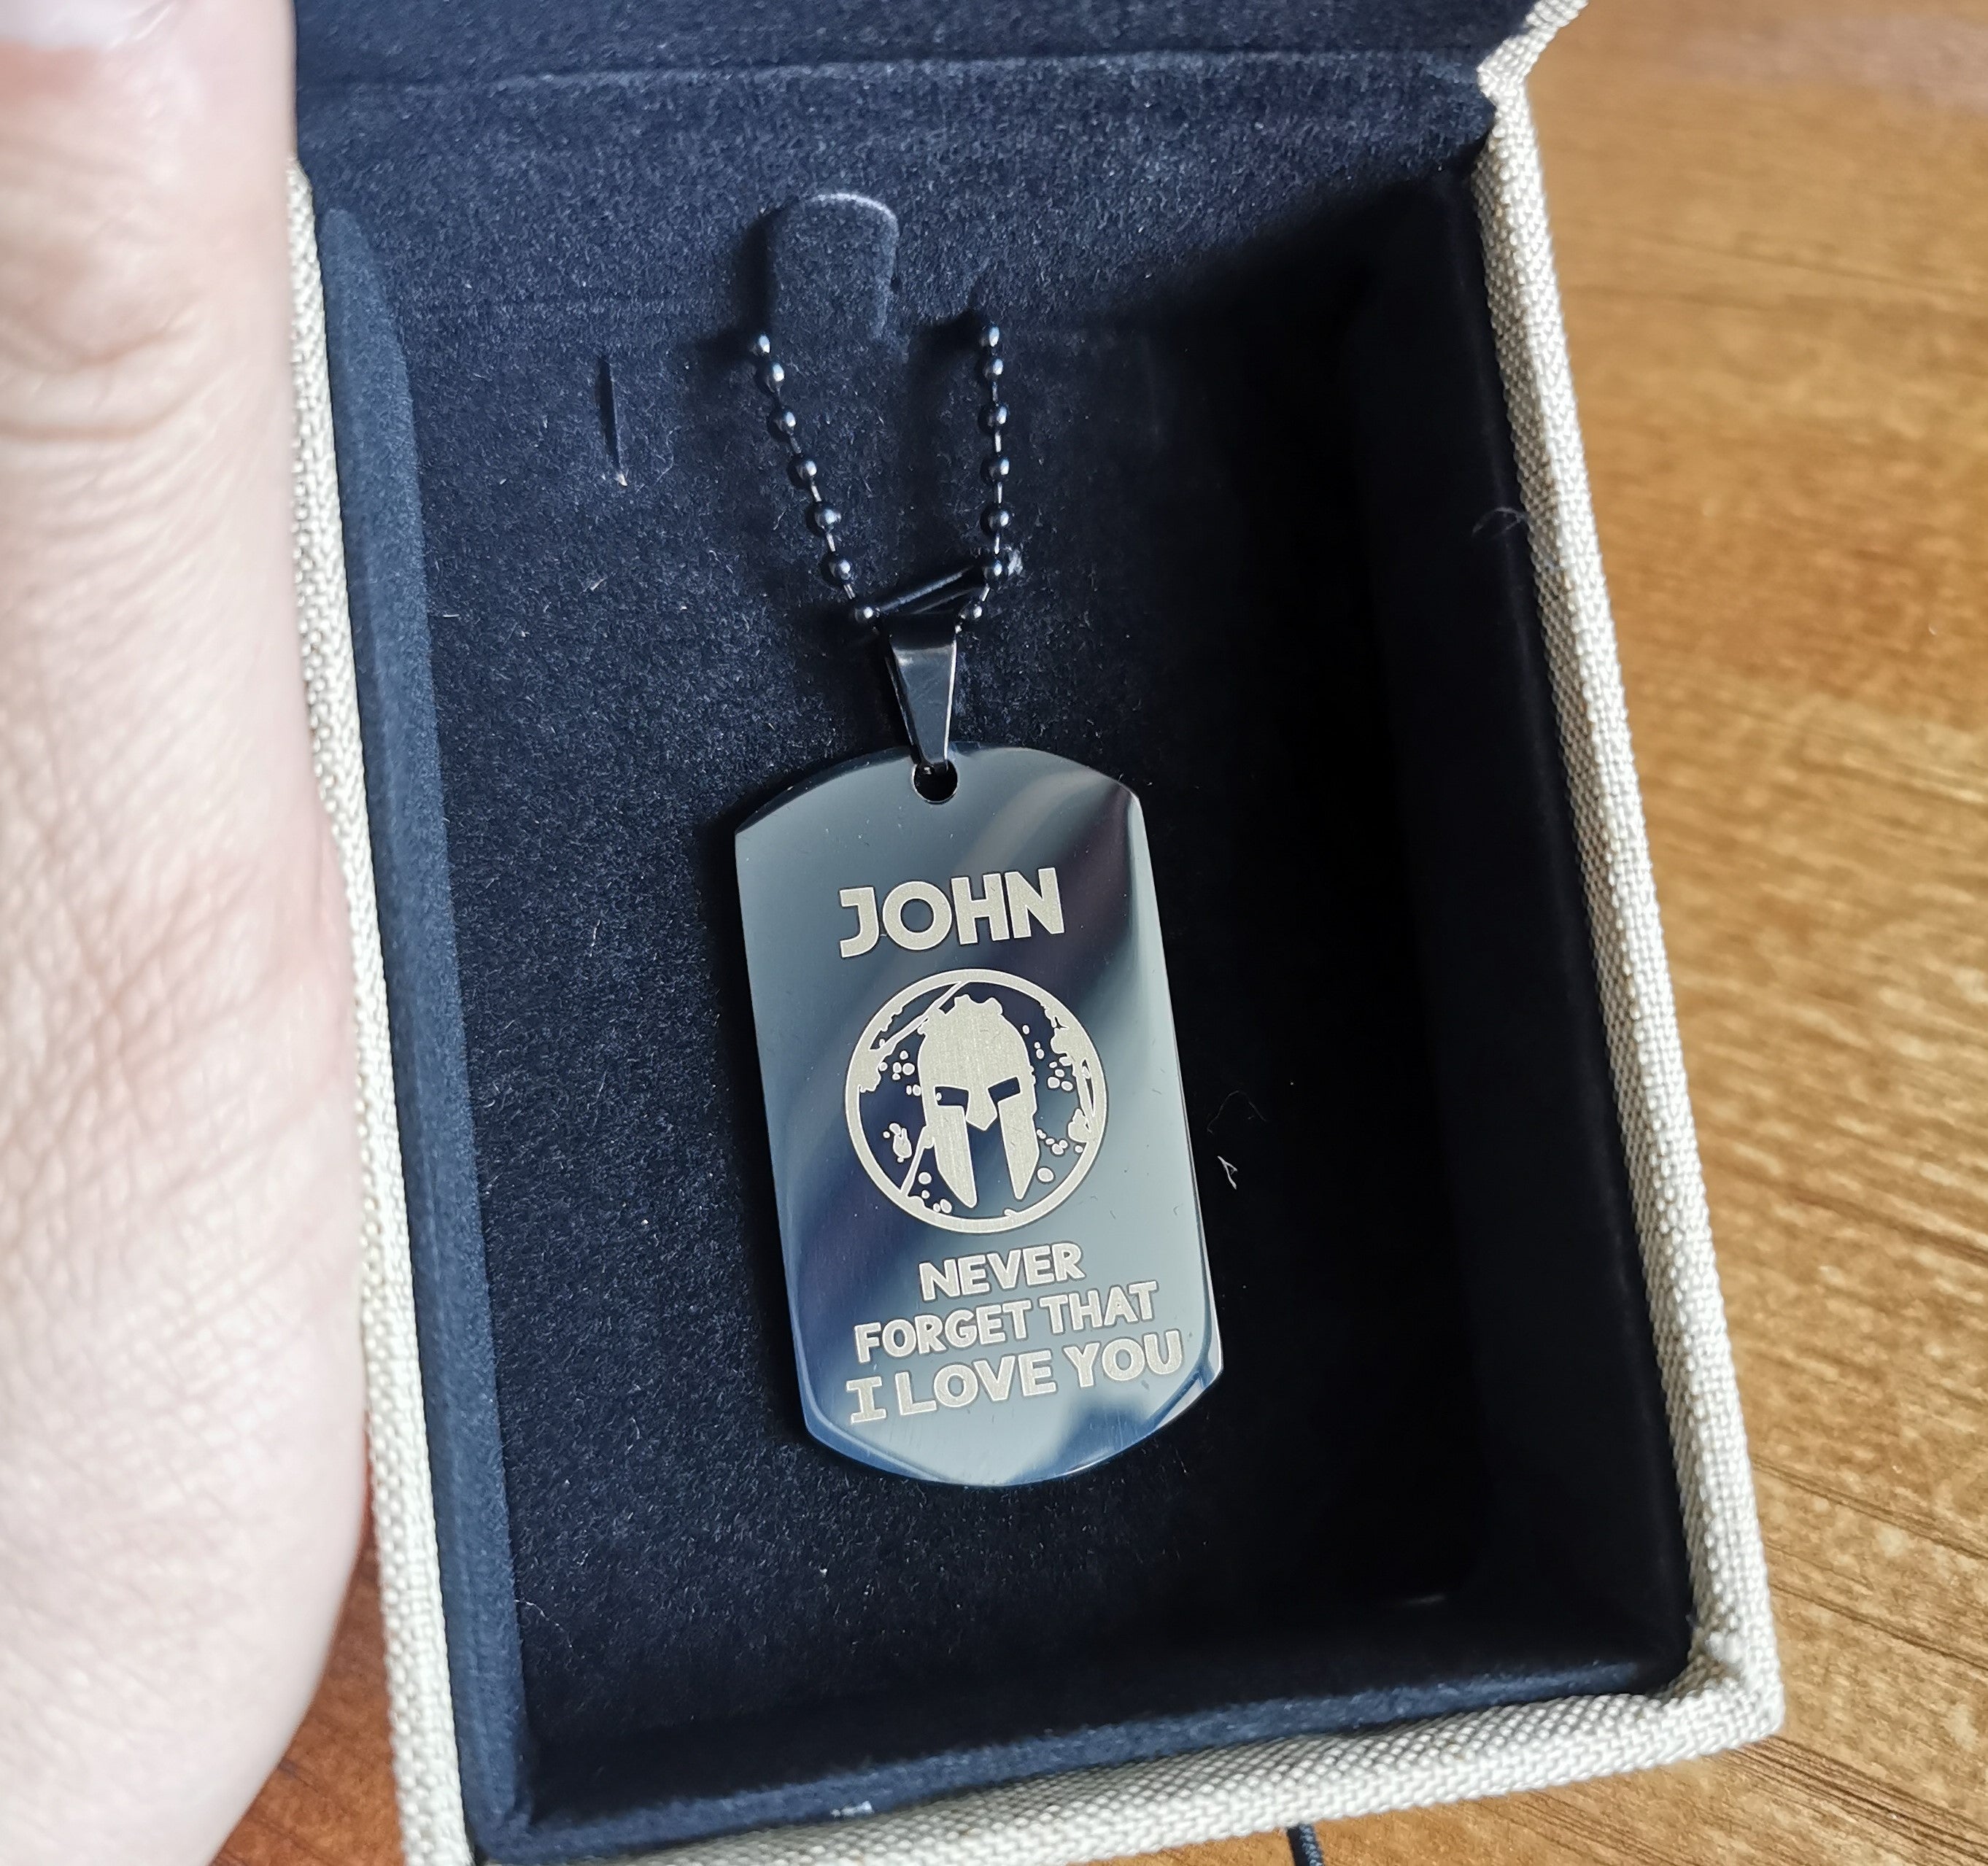 Customizable one sided dog tag soldier and firefighter Call on me brother gifts for brothers